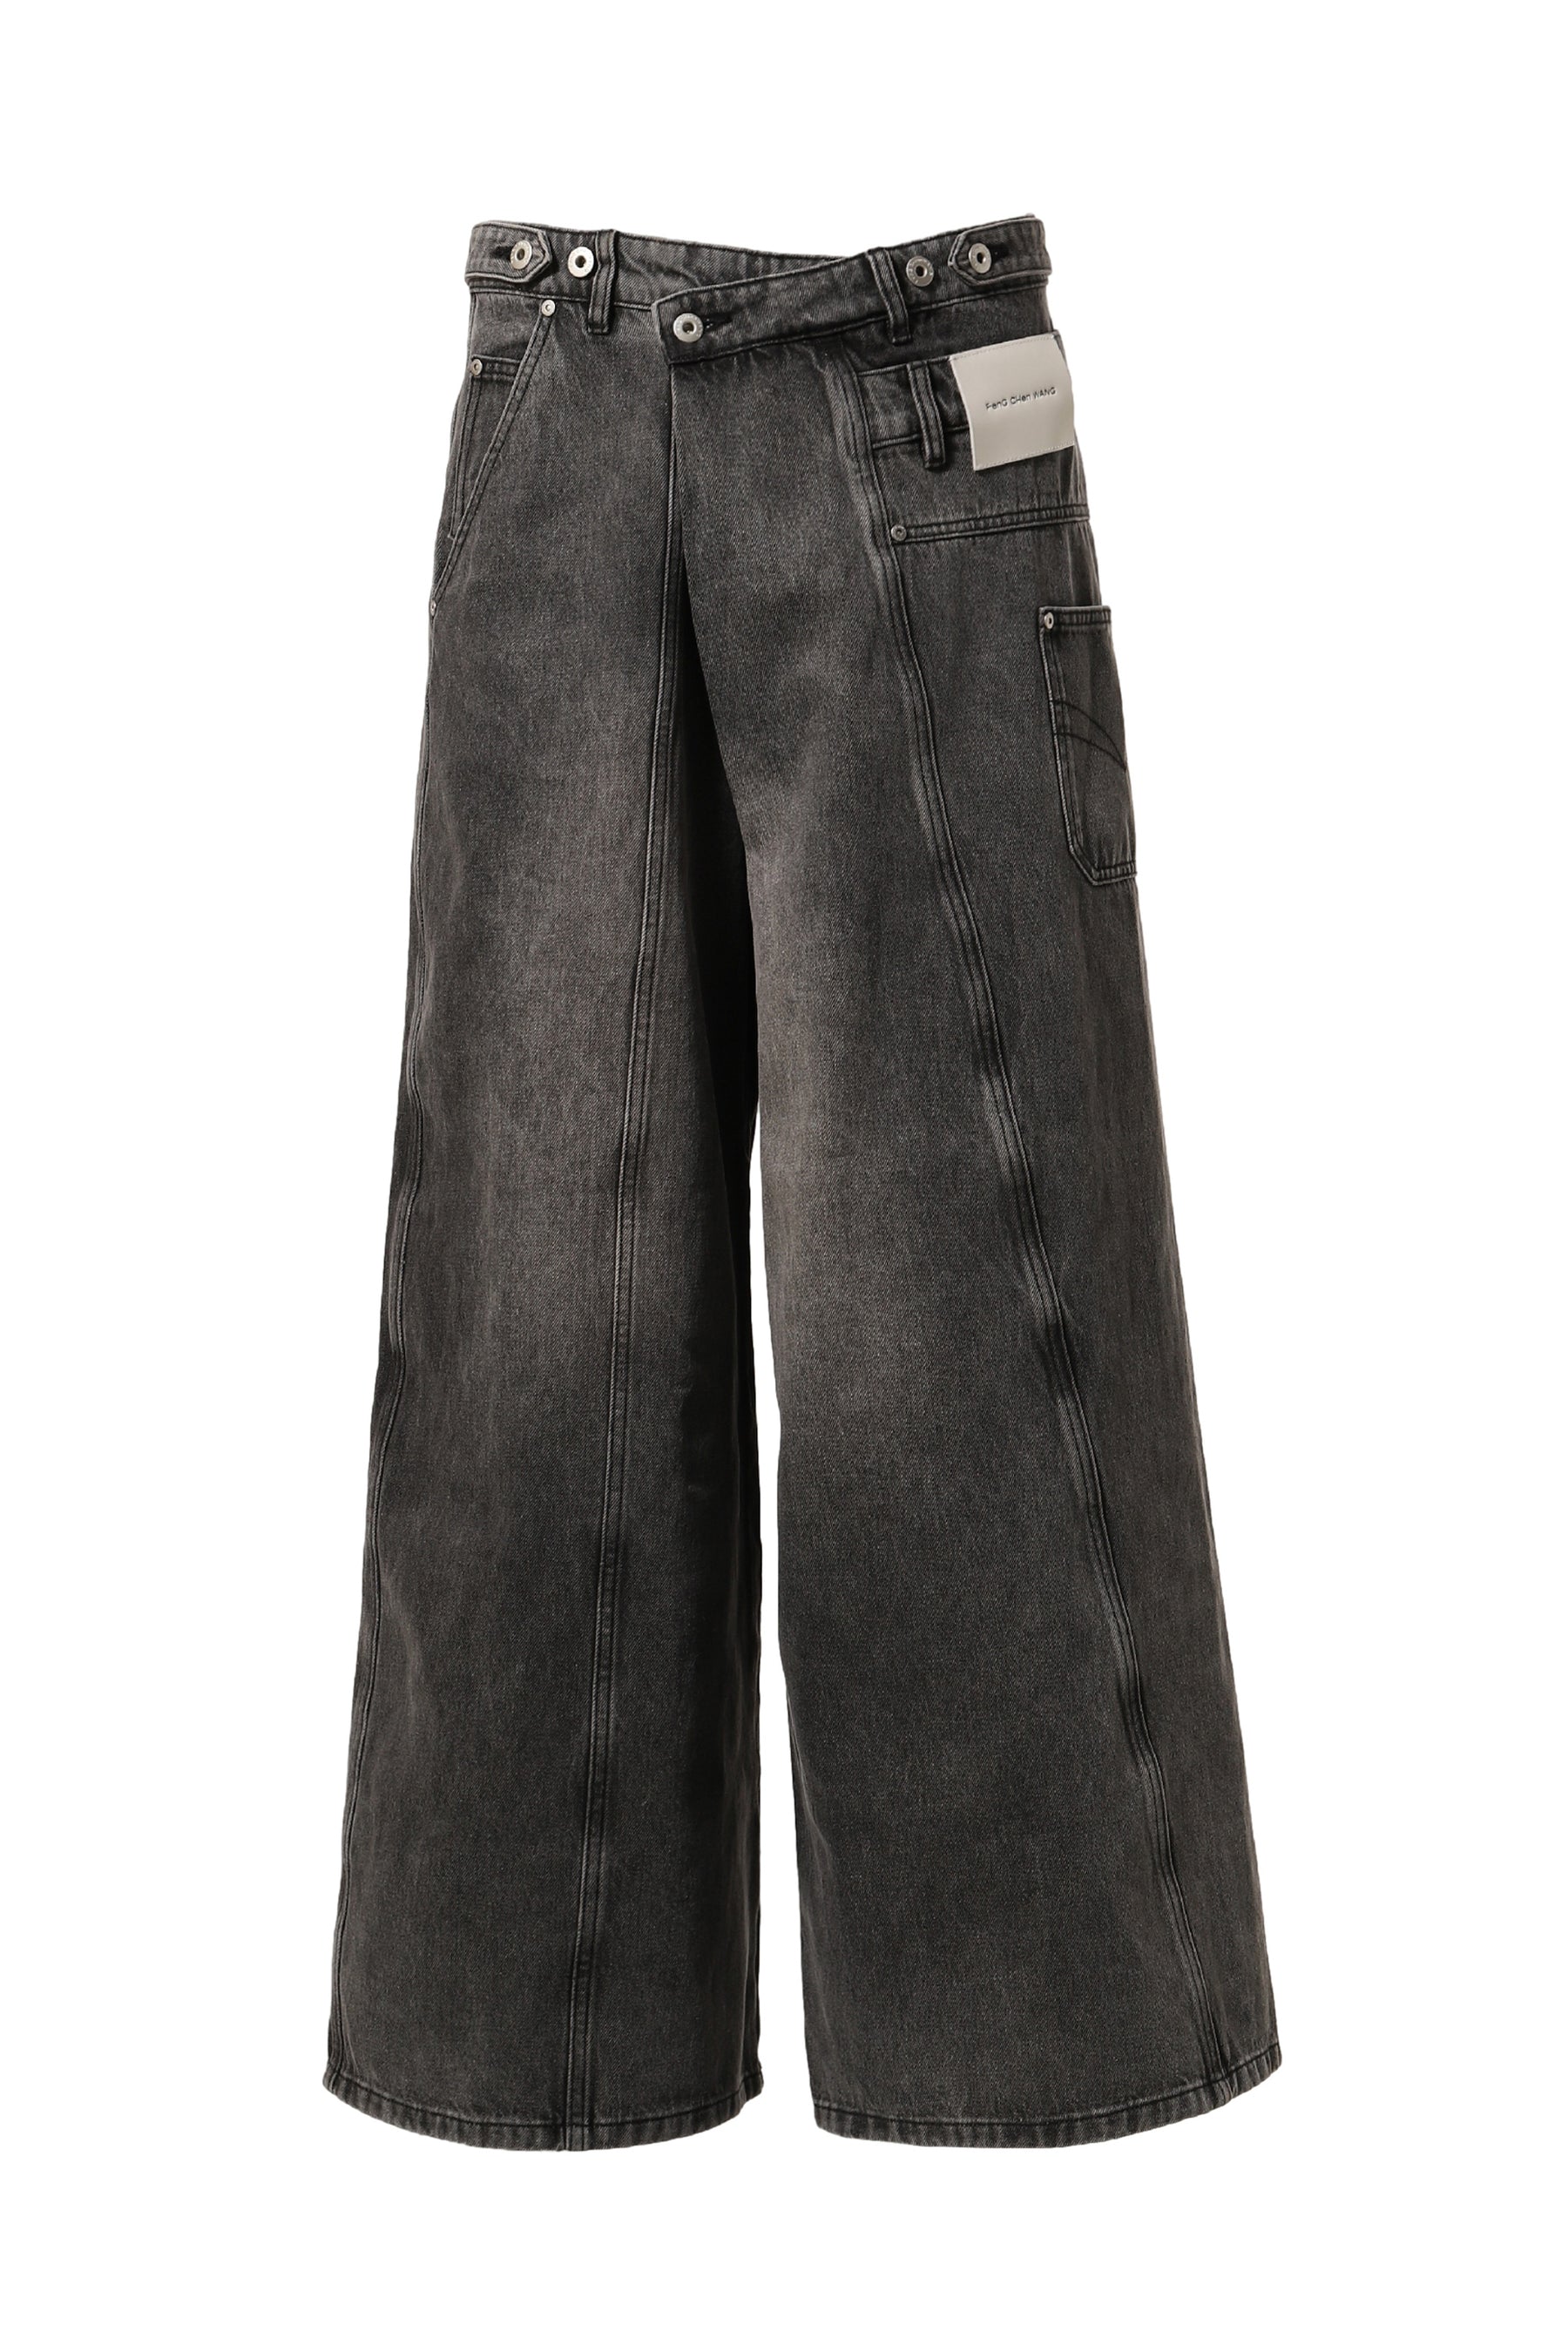 doubletfeng chen wang panel jeans